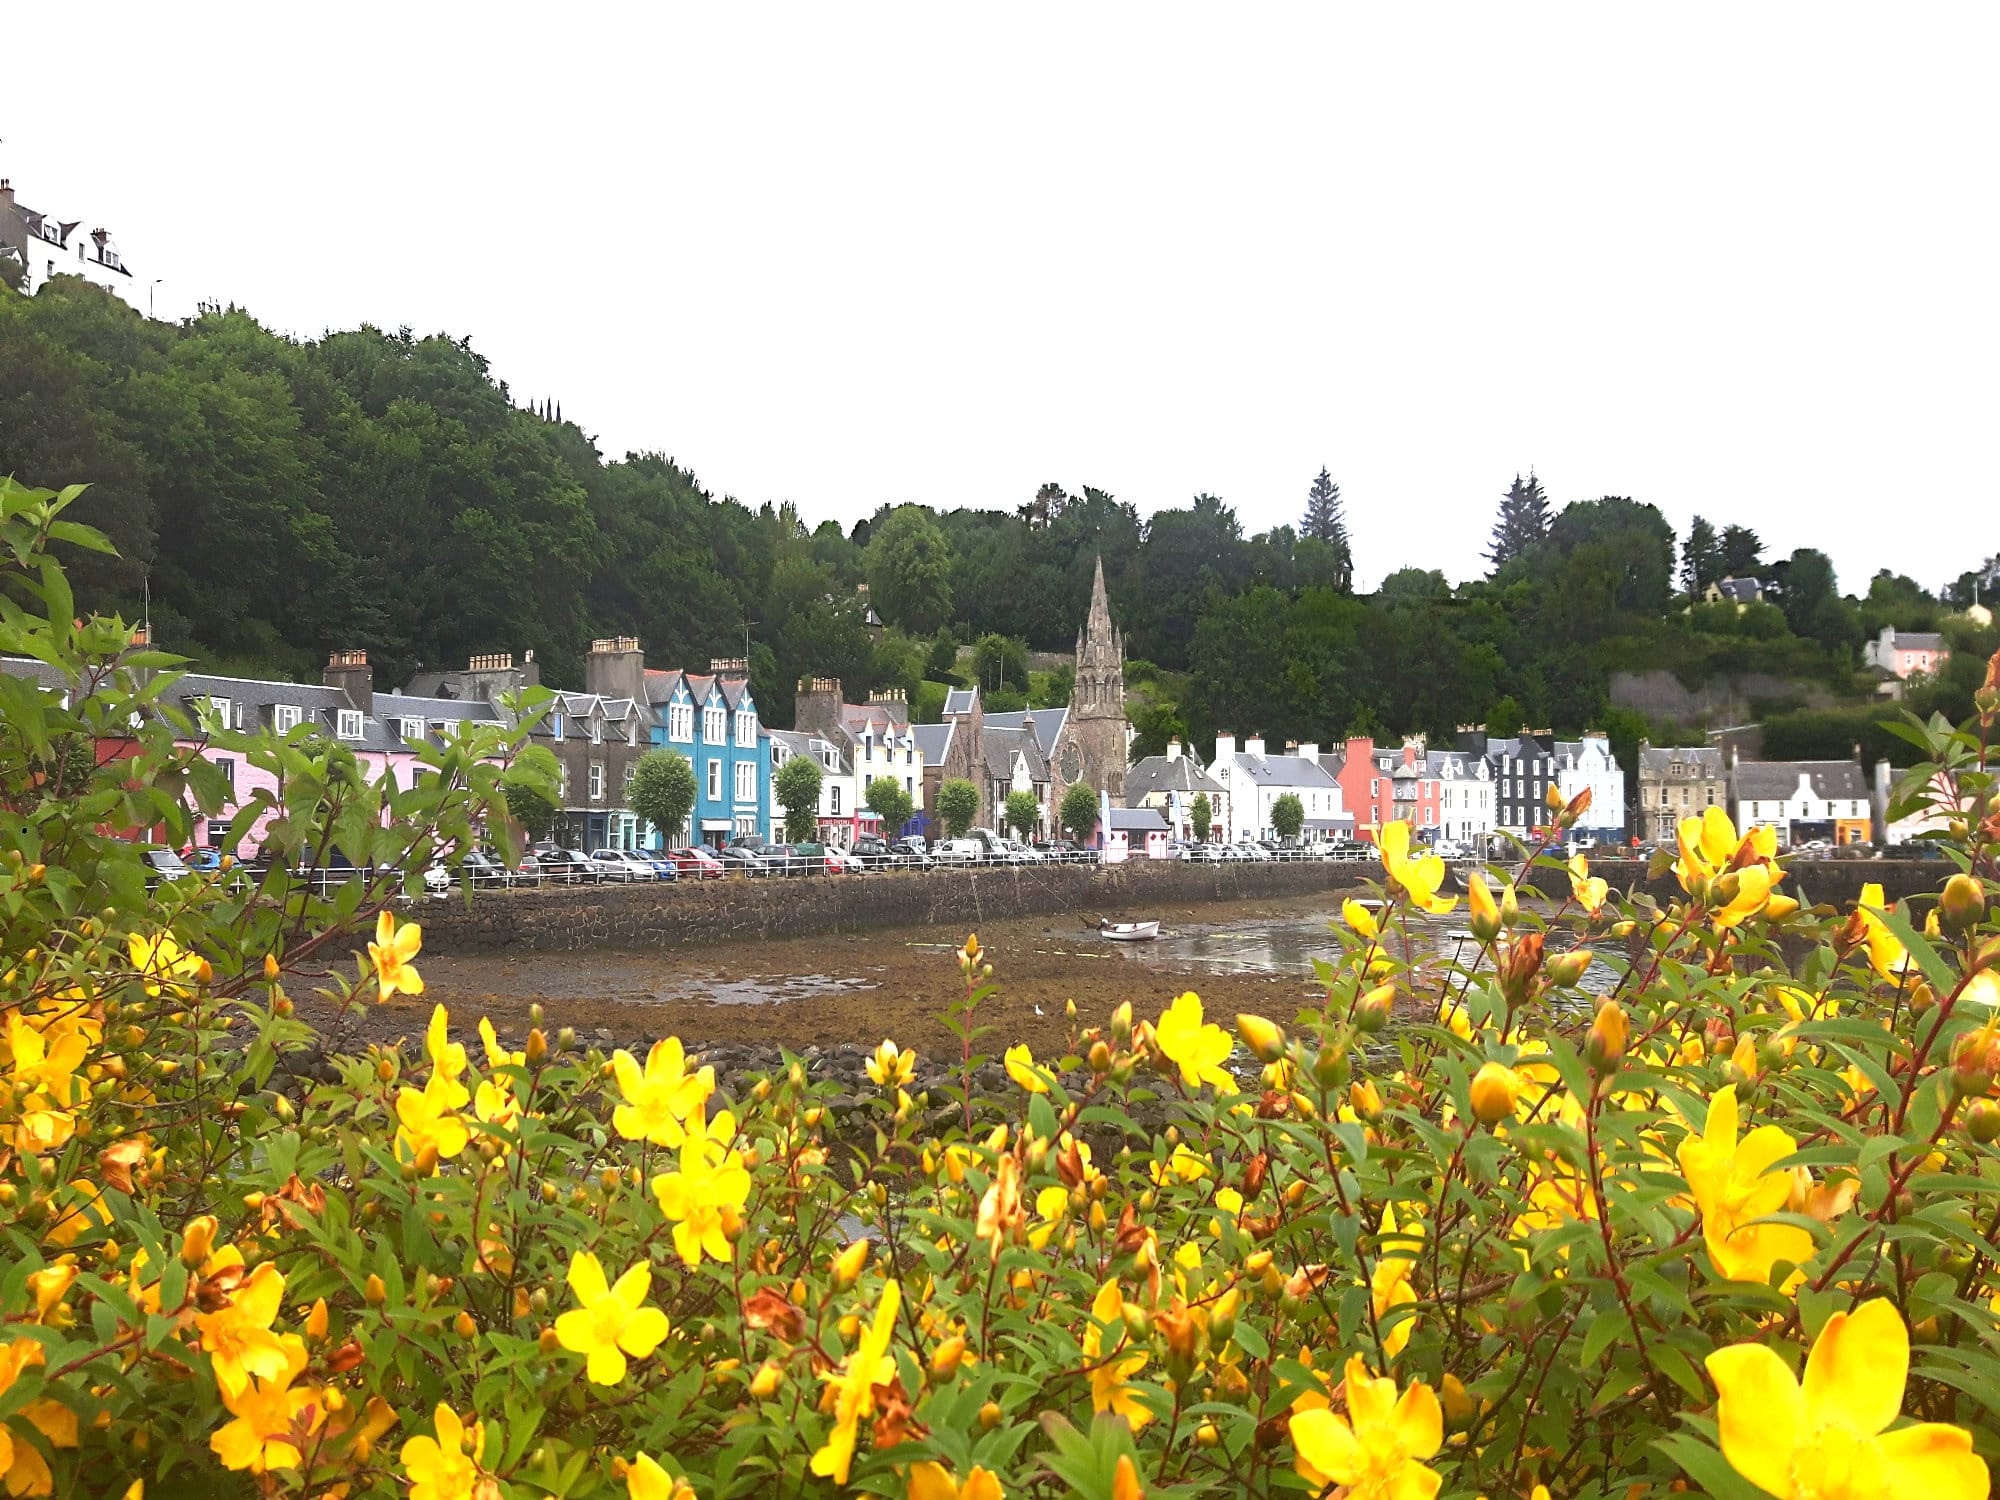 The city of Tobermory with yellow flowers in the foreground